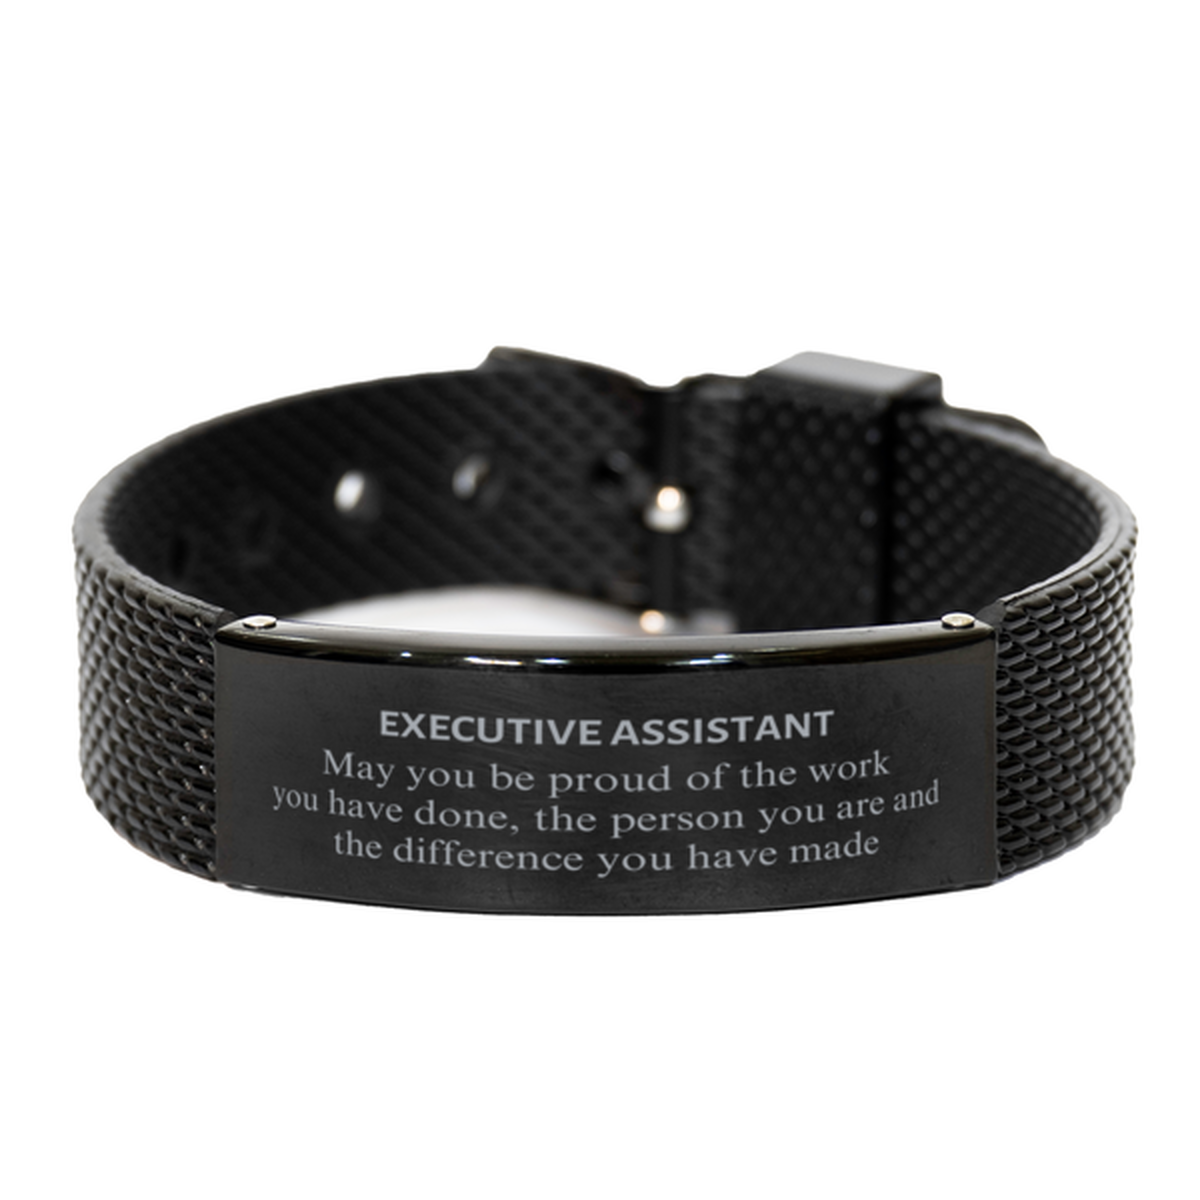 Executive Assistant May you be proud of the work you have done, Retirement Executive Assistant Black Shark Mesh Bracelet for Colleague Appreciation Gifts Amazing for Executive Assistant